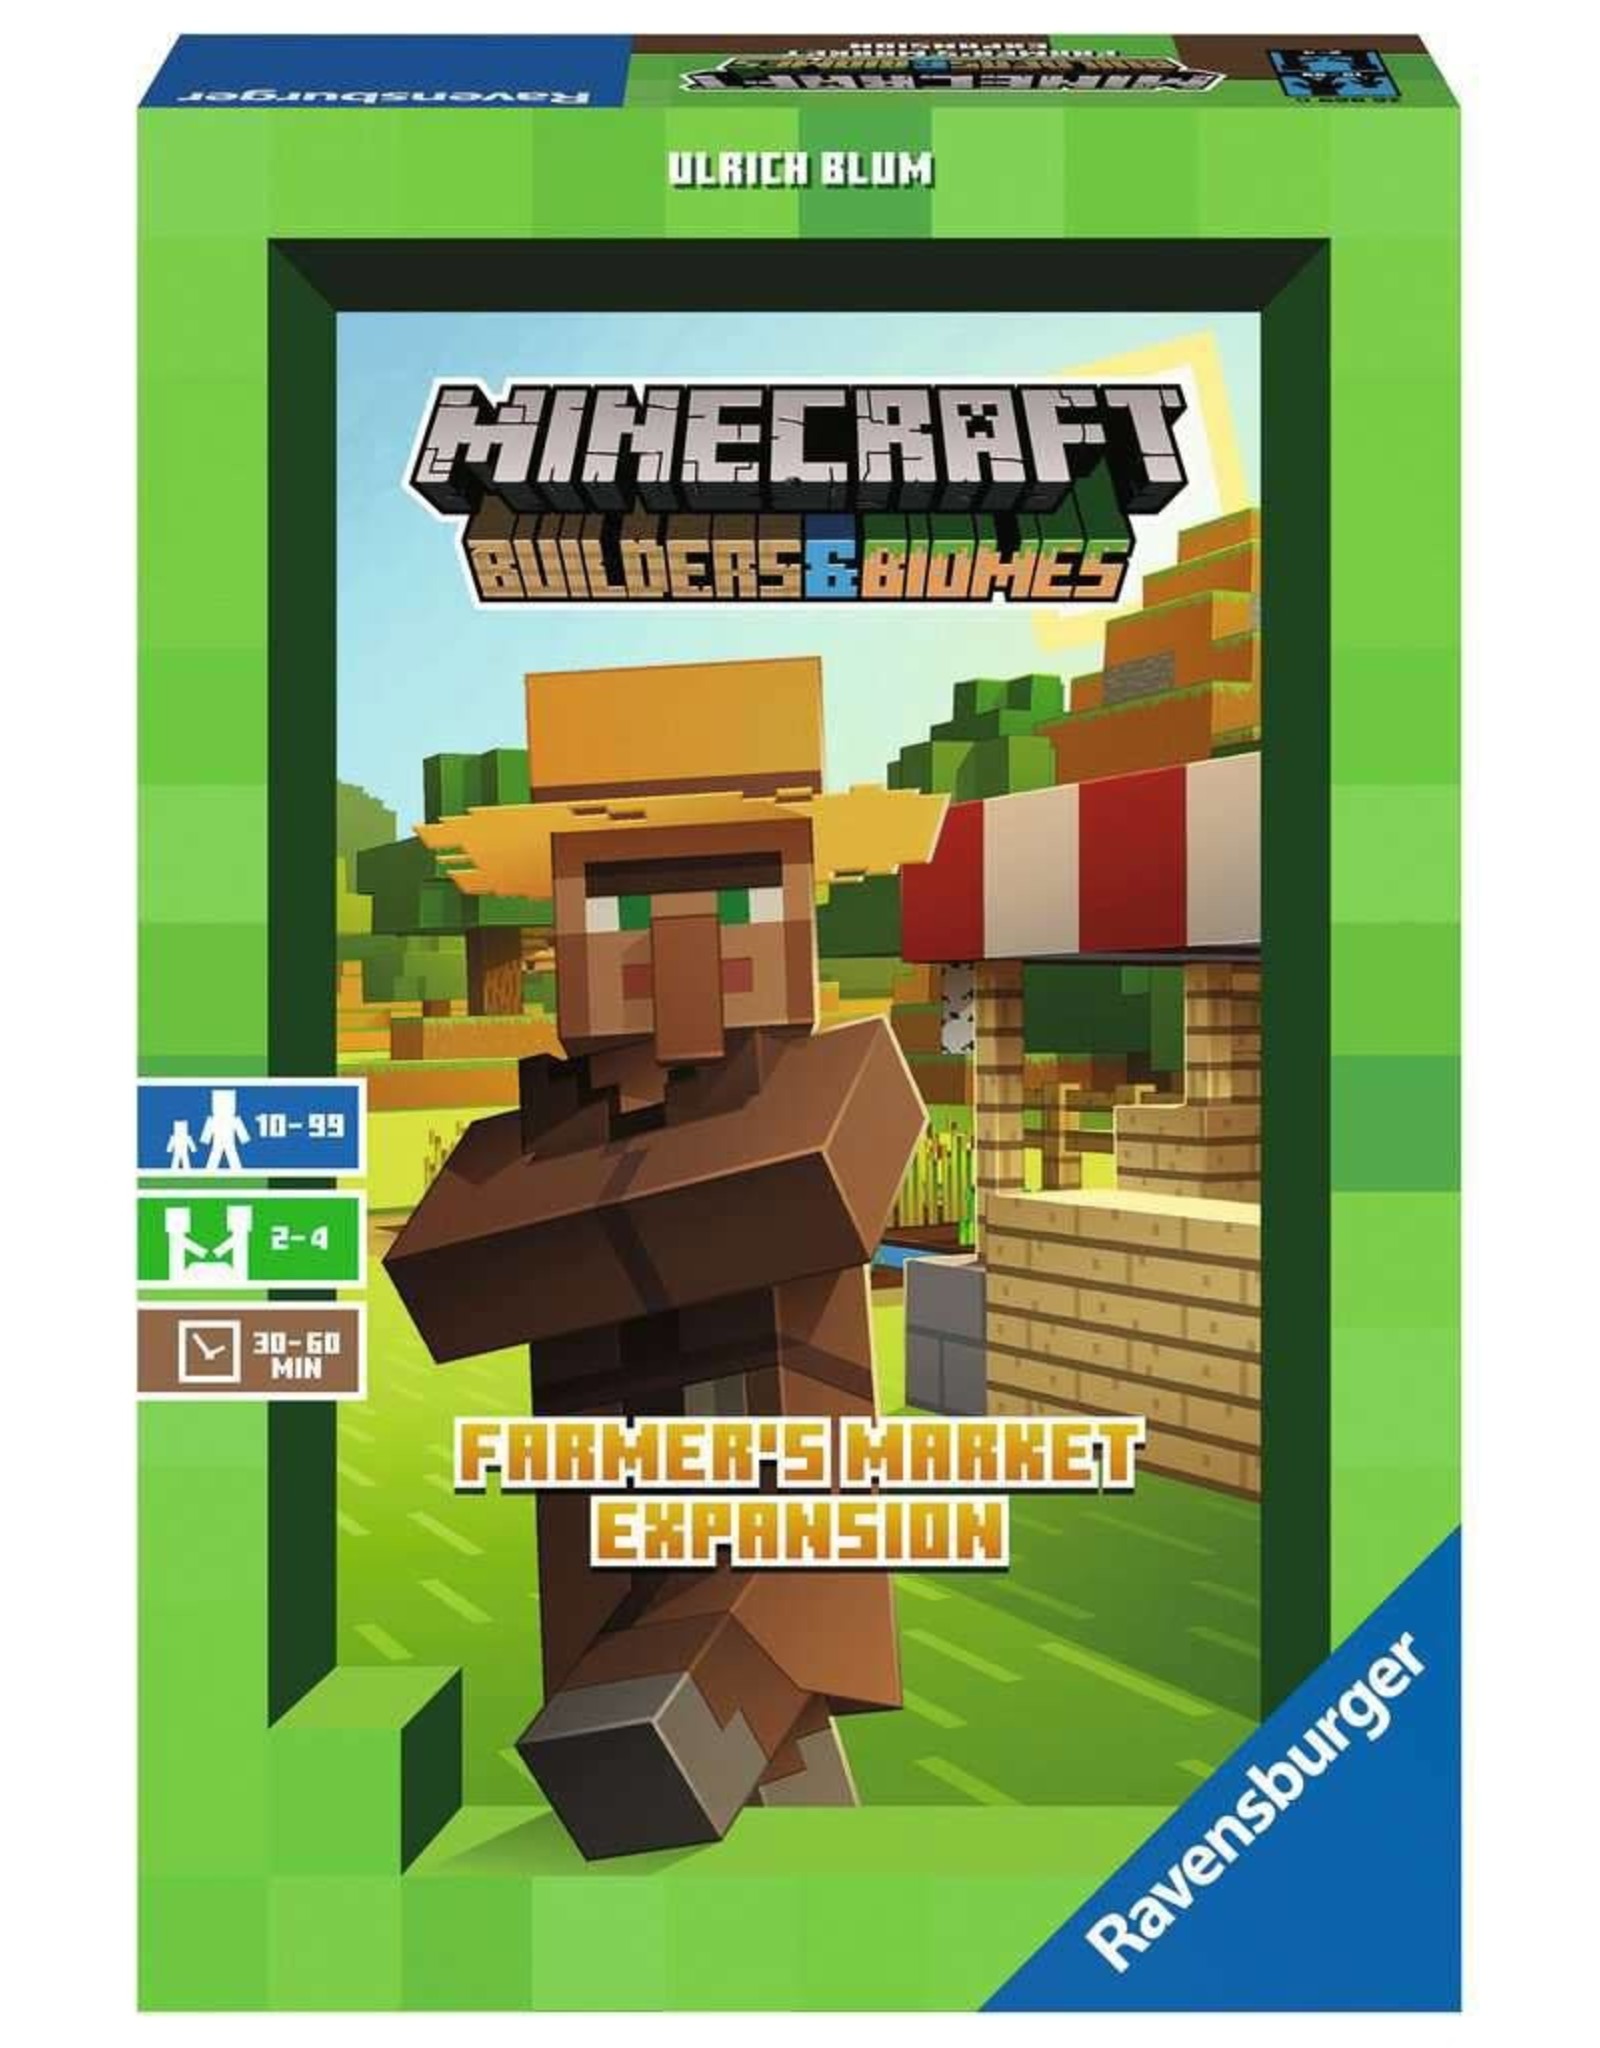 Ravensburger MINECRAFT - The Board Game Expansion Builders & Biomes: Farmers Market